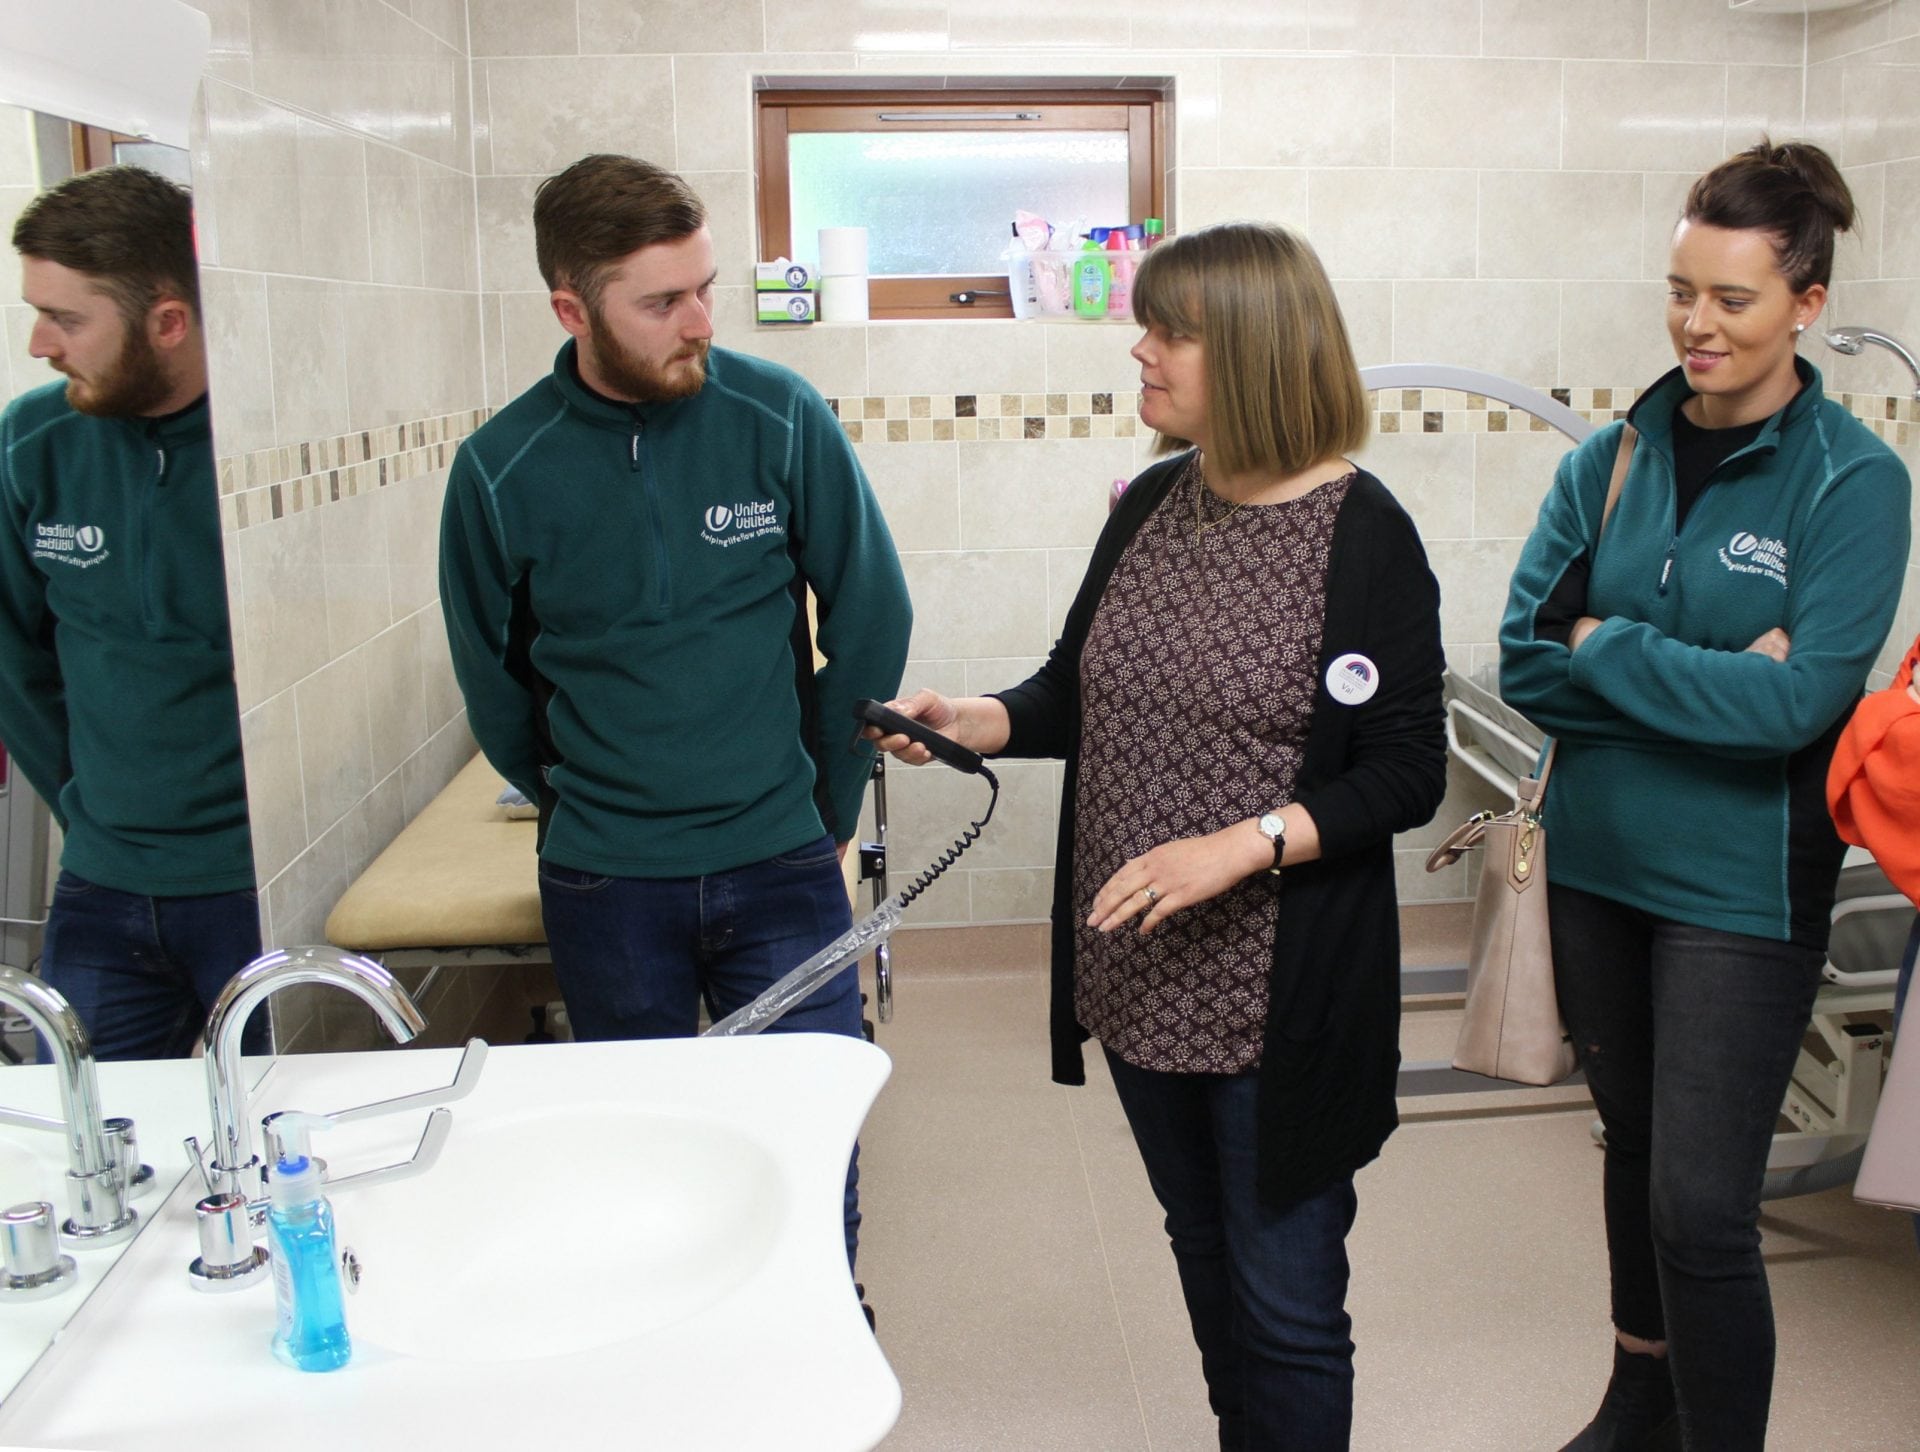 United Utilities employees view the facilities in Francis House